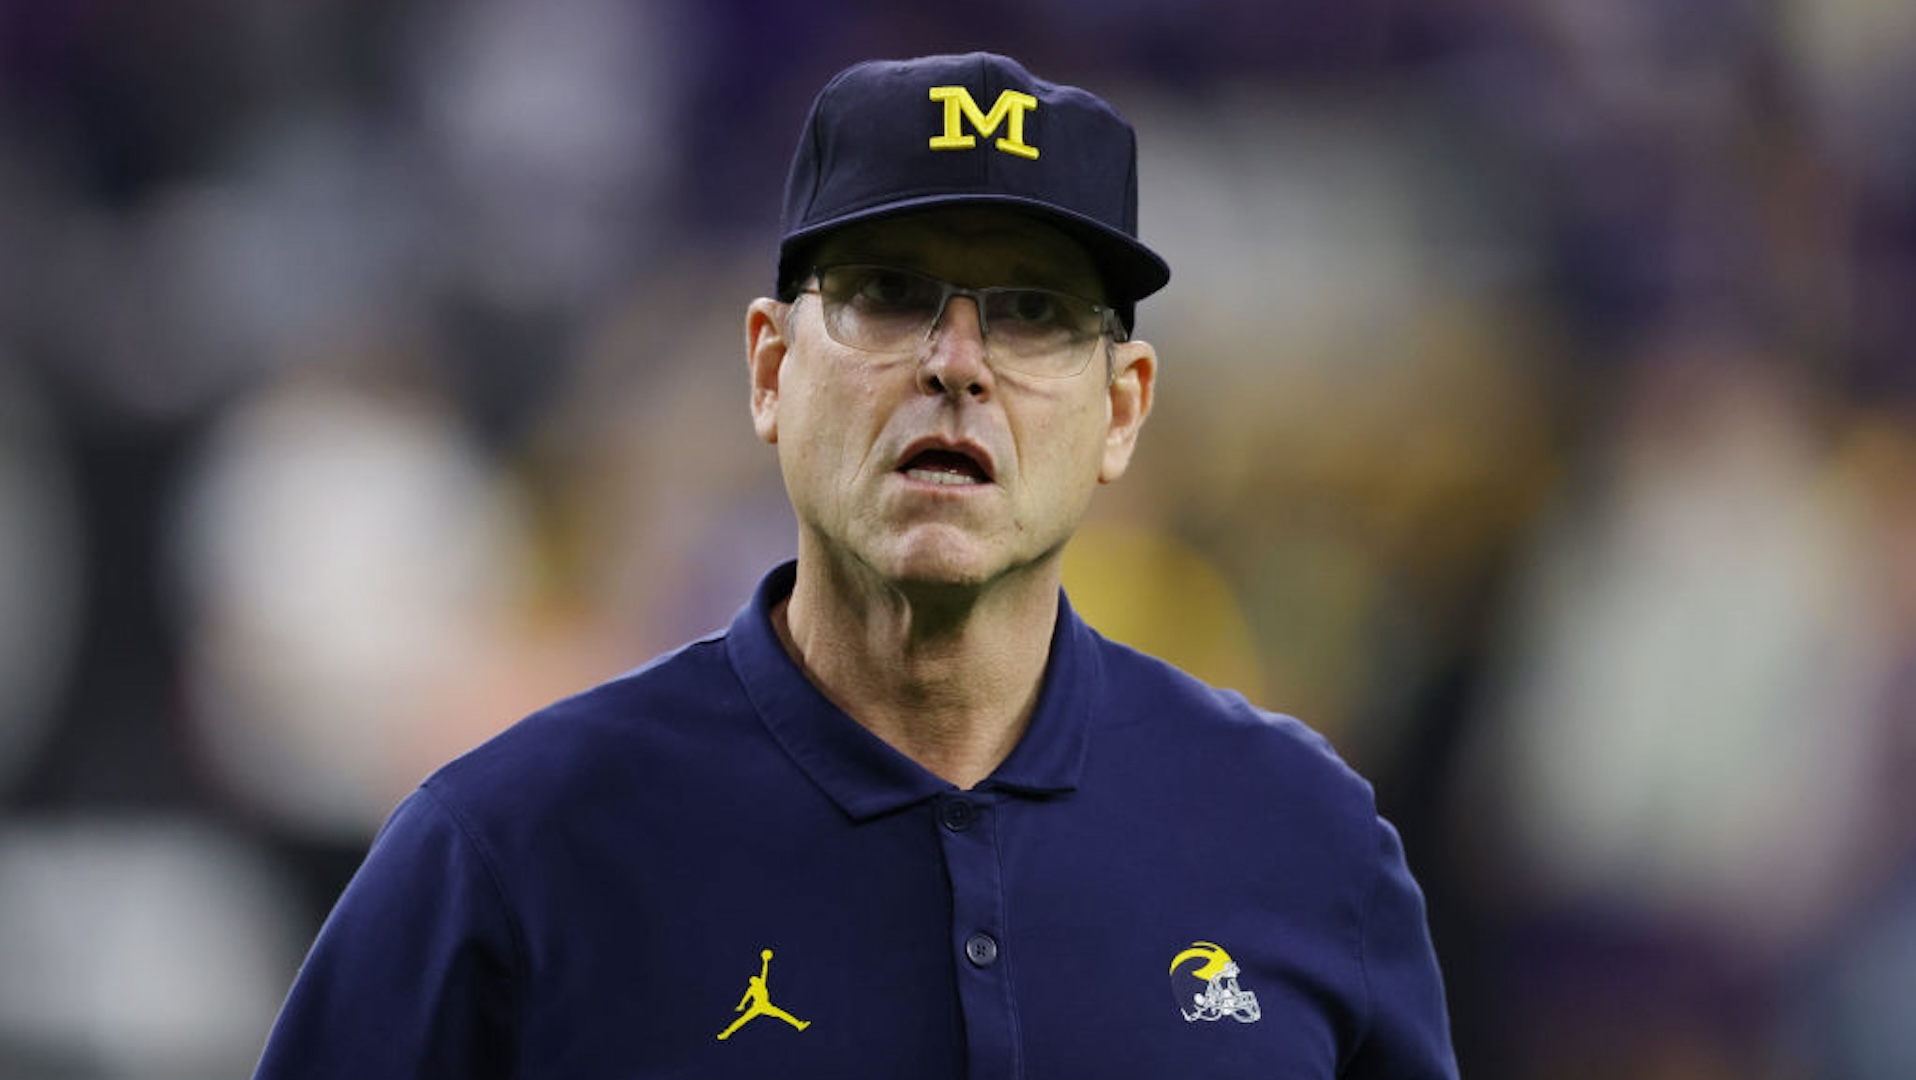 Head coach Jim Harbaugh of the Michigan Wolverines reacts during warm-ups prior to the 2024 CFP National Championship game against the Washington Huskies at NRG Stadium on January 08, 2024 in Houston, Texas.